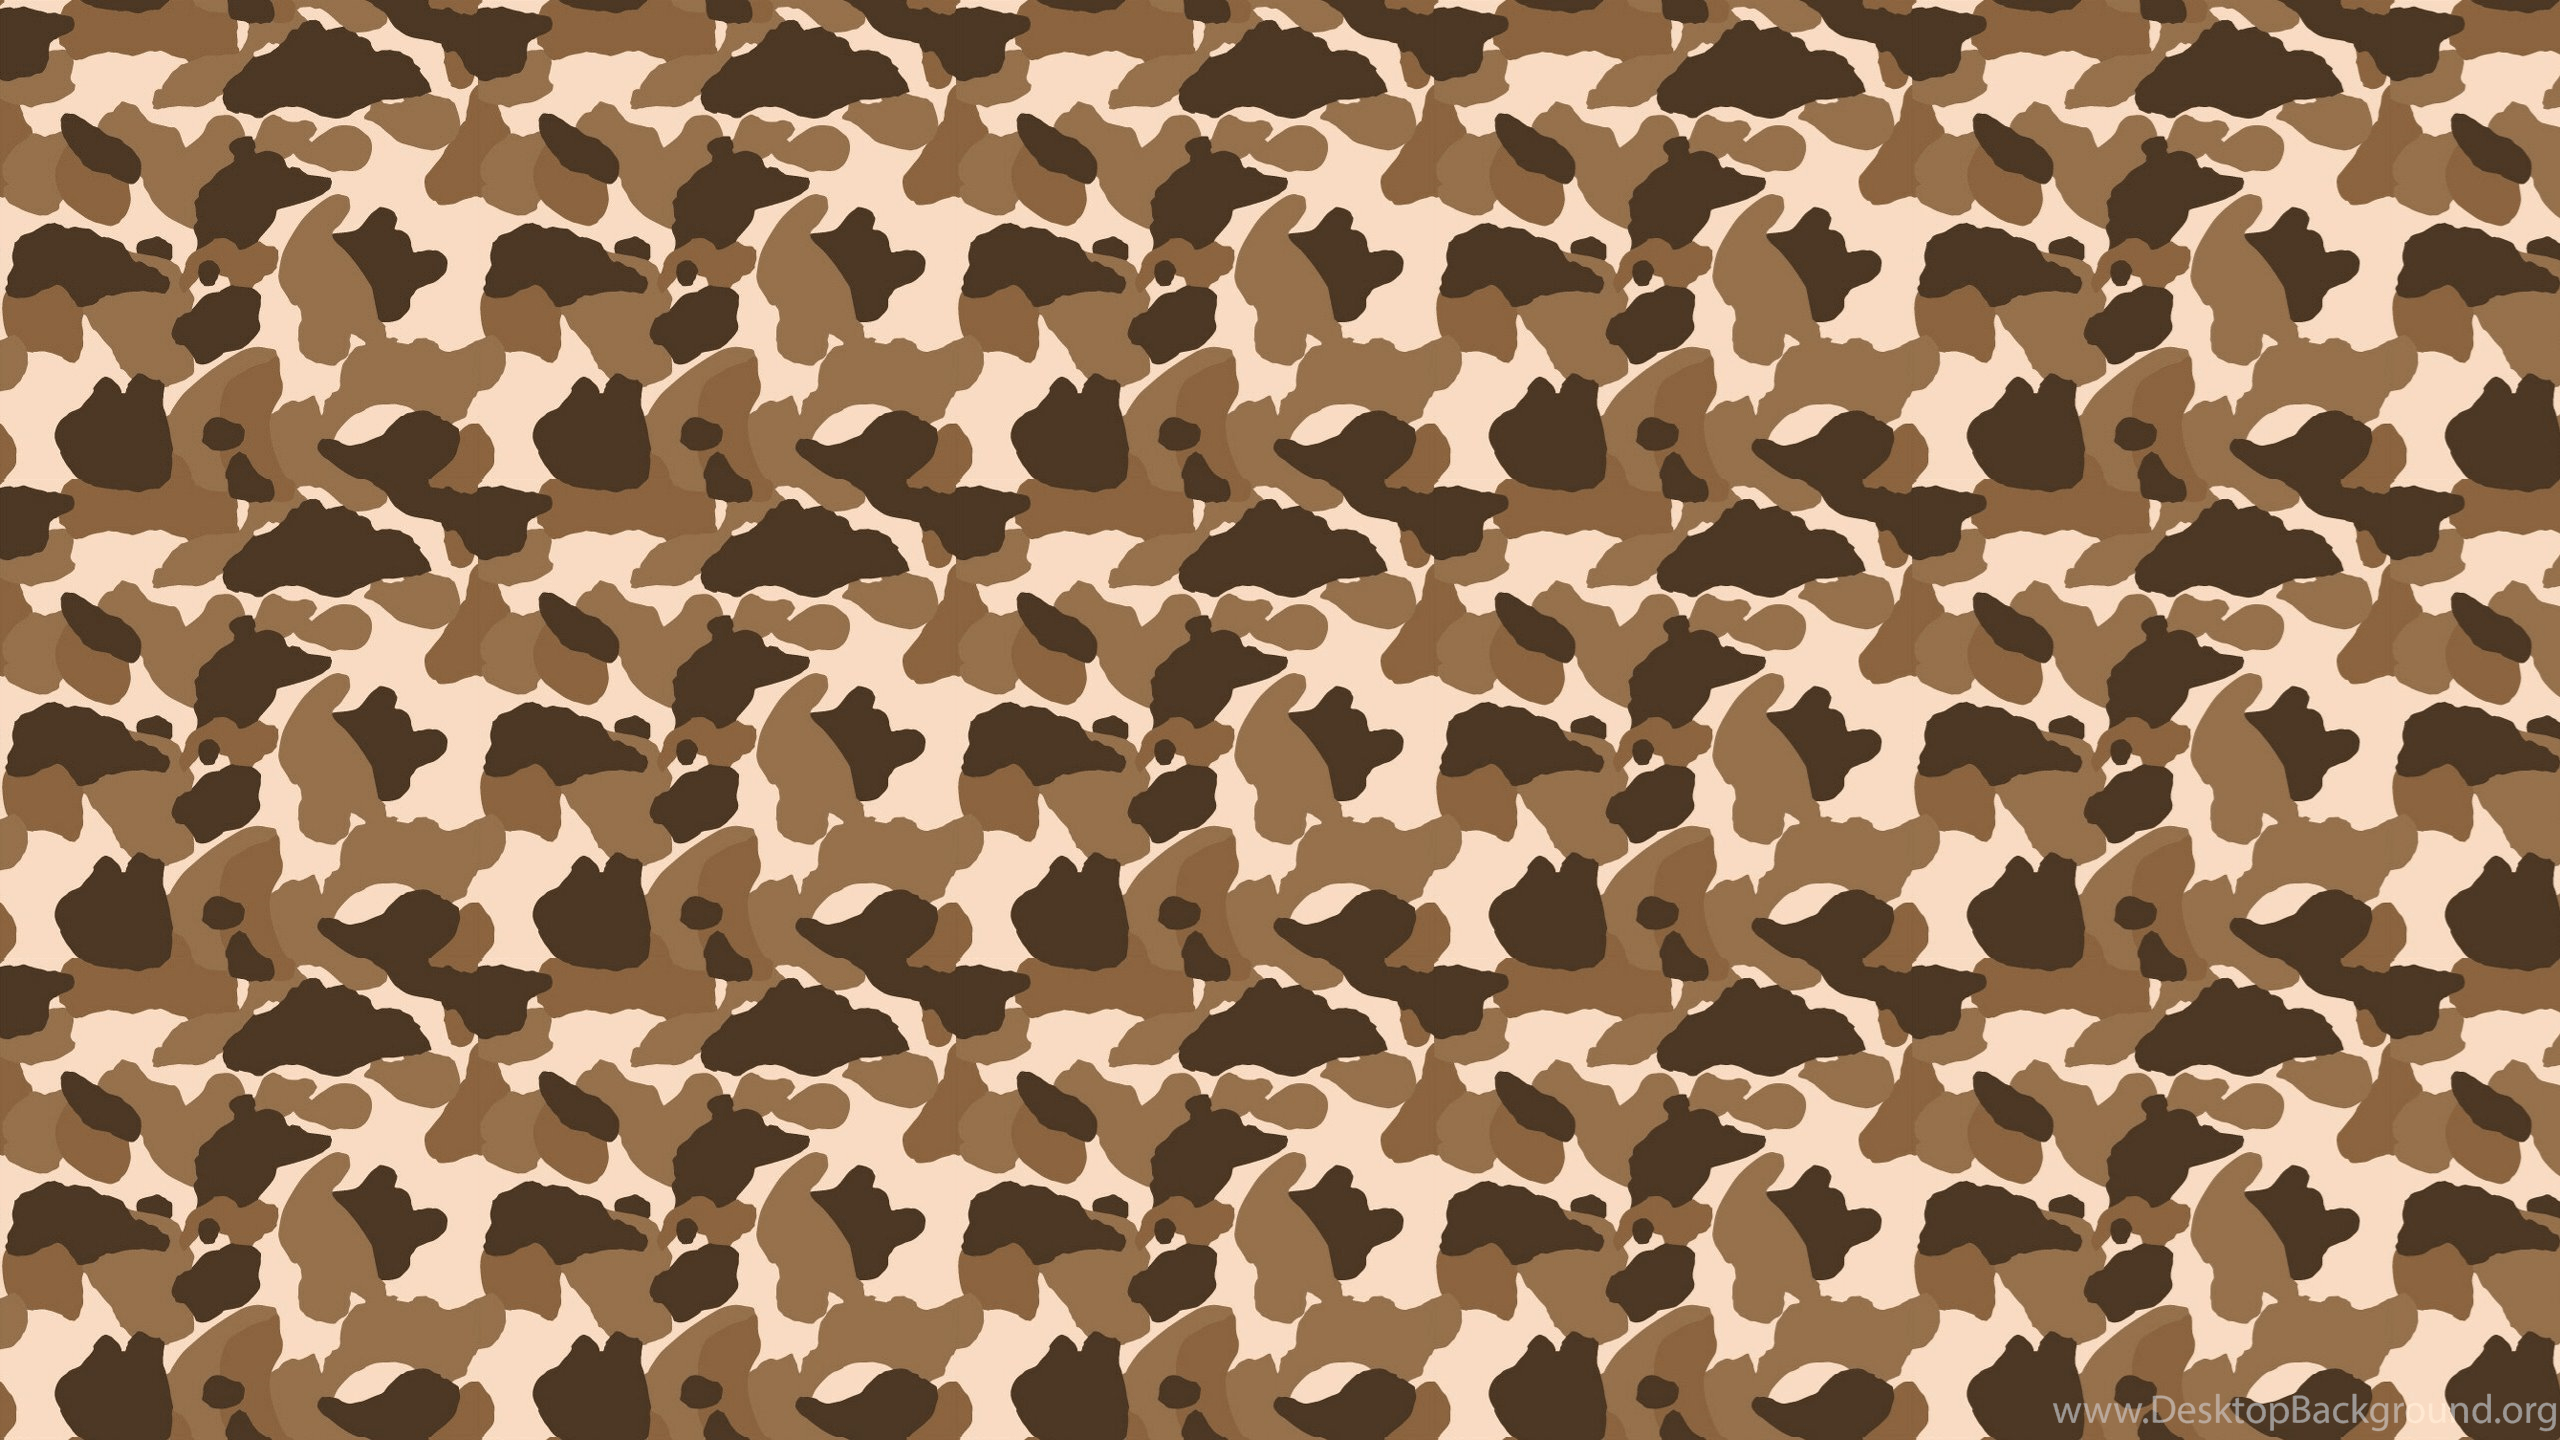 Brown Camo BAPE Logo - Wallpaper Bape Installing This Brown Camo Is Easy Just Save